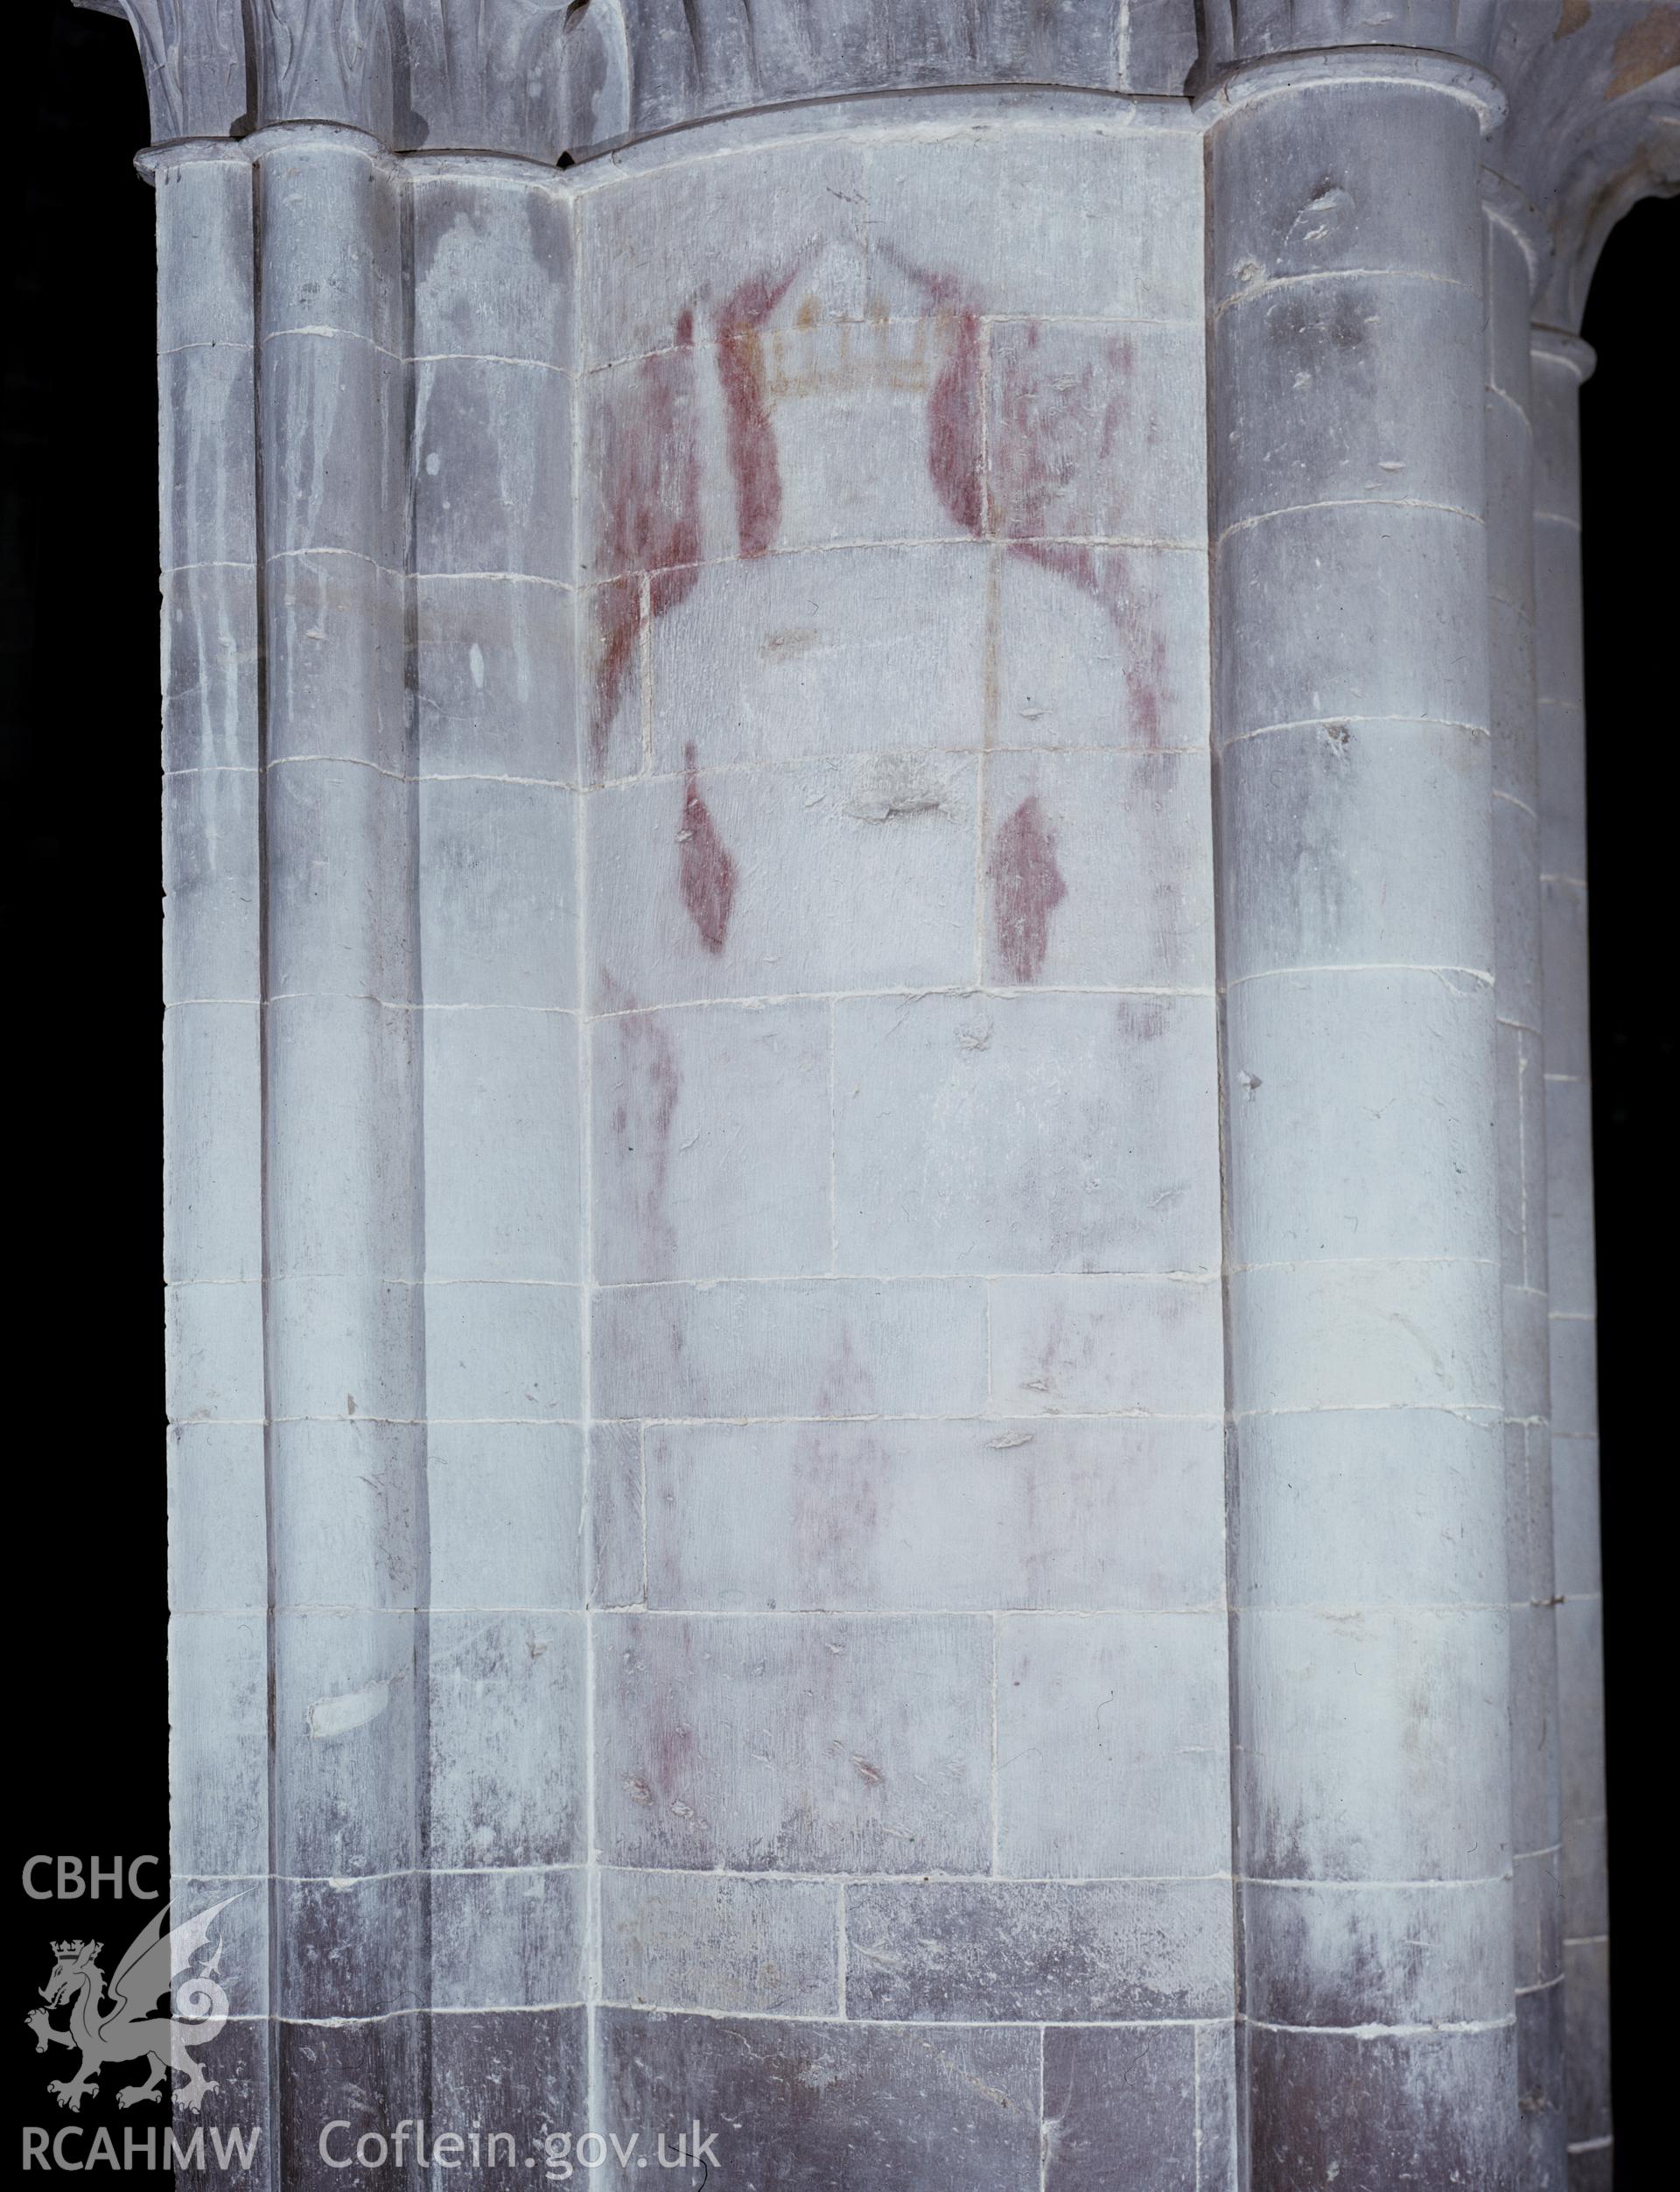 RCAHMW colour transparency showing St David's Cathedral taken by RCAHMW 1986.